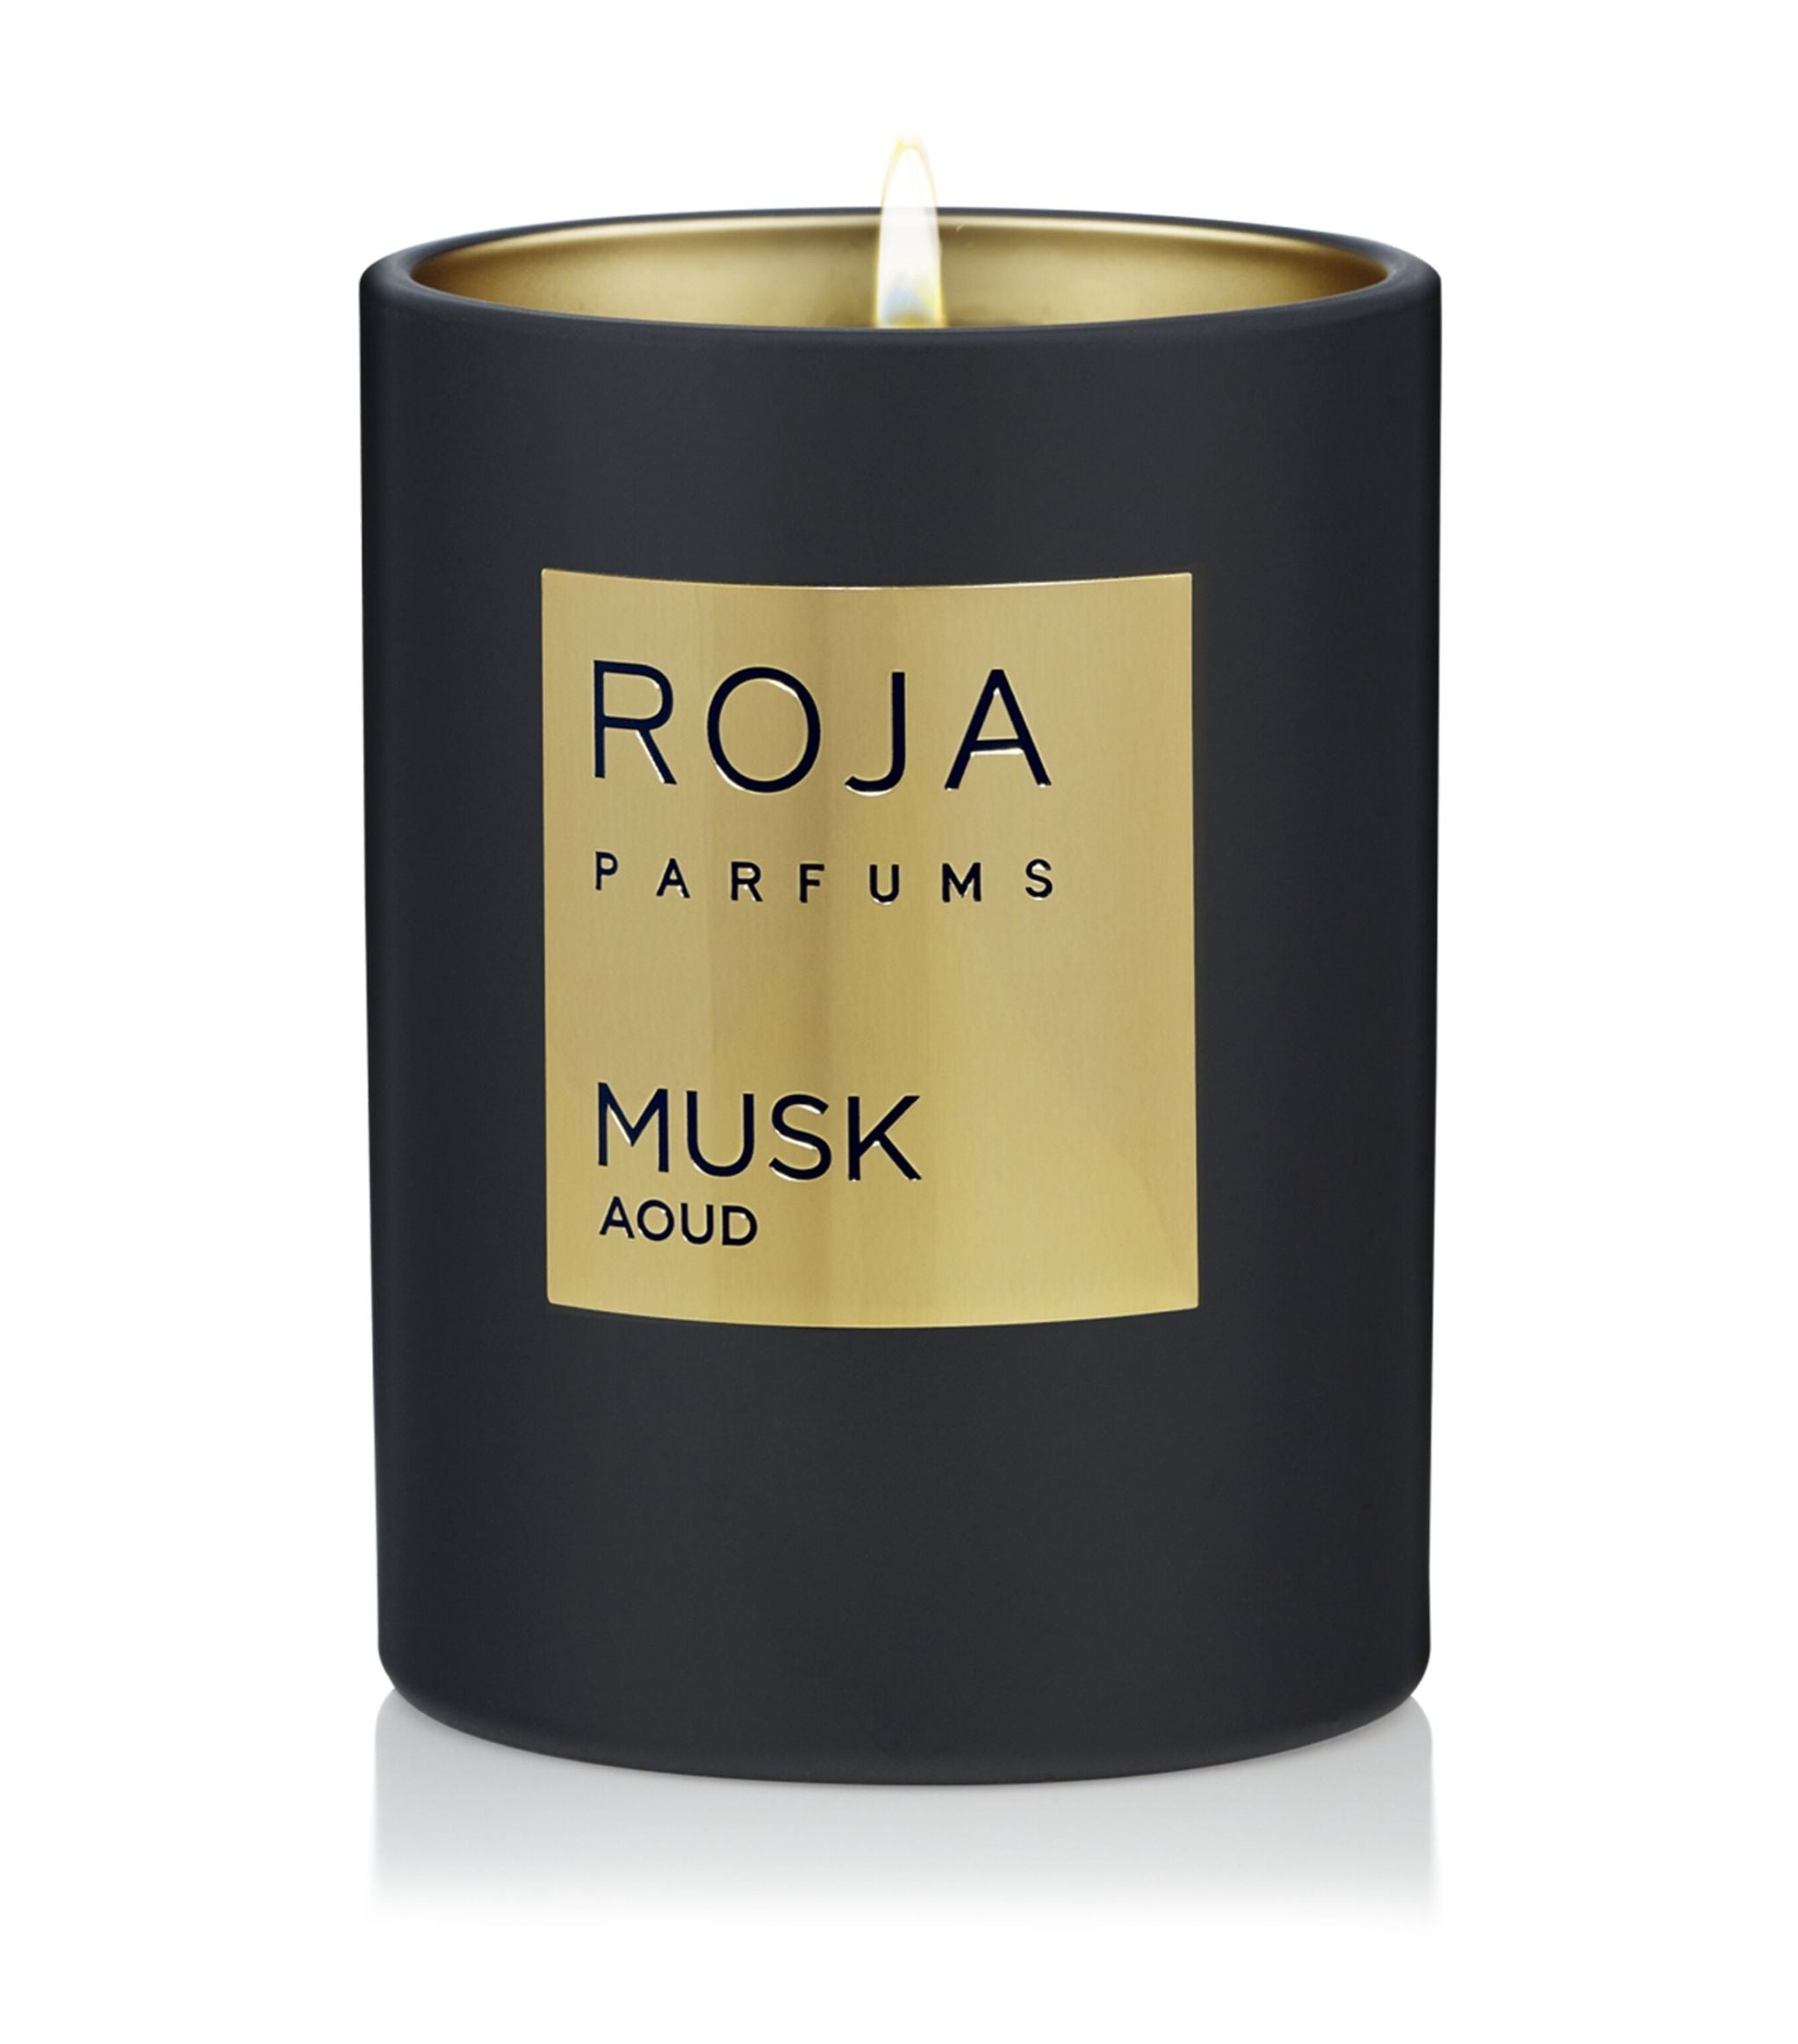 RDP MUSK AOUD 300G CANDLE